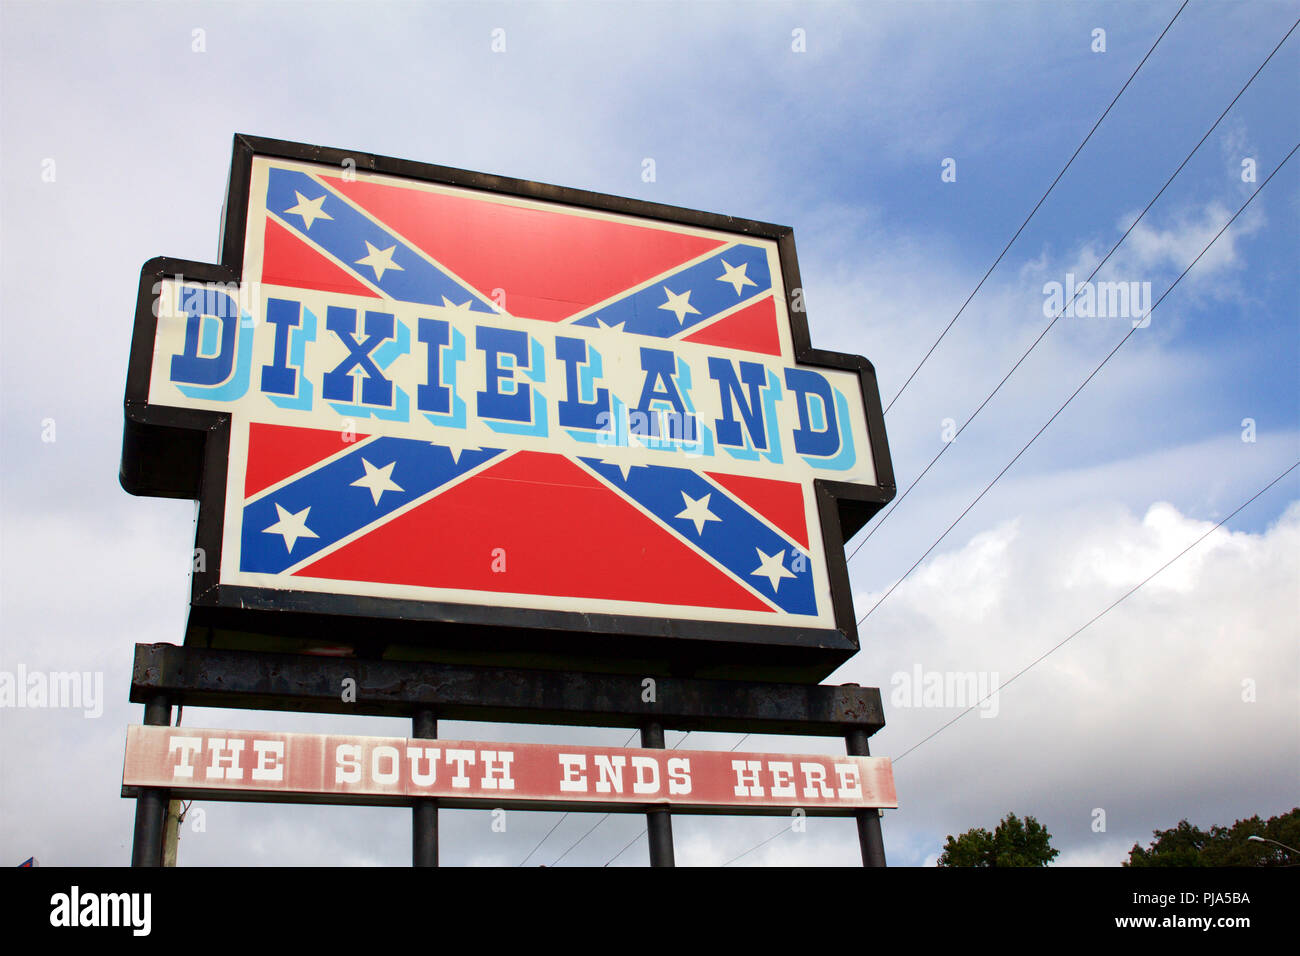 New Church, Virginia, USA - September 1, 2018: Confederate flags surpass American flags in size and number at Dixieland, a gas station and gift shop. Stock Photo